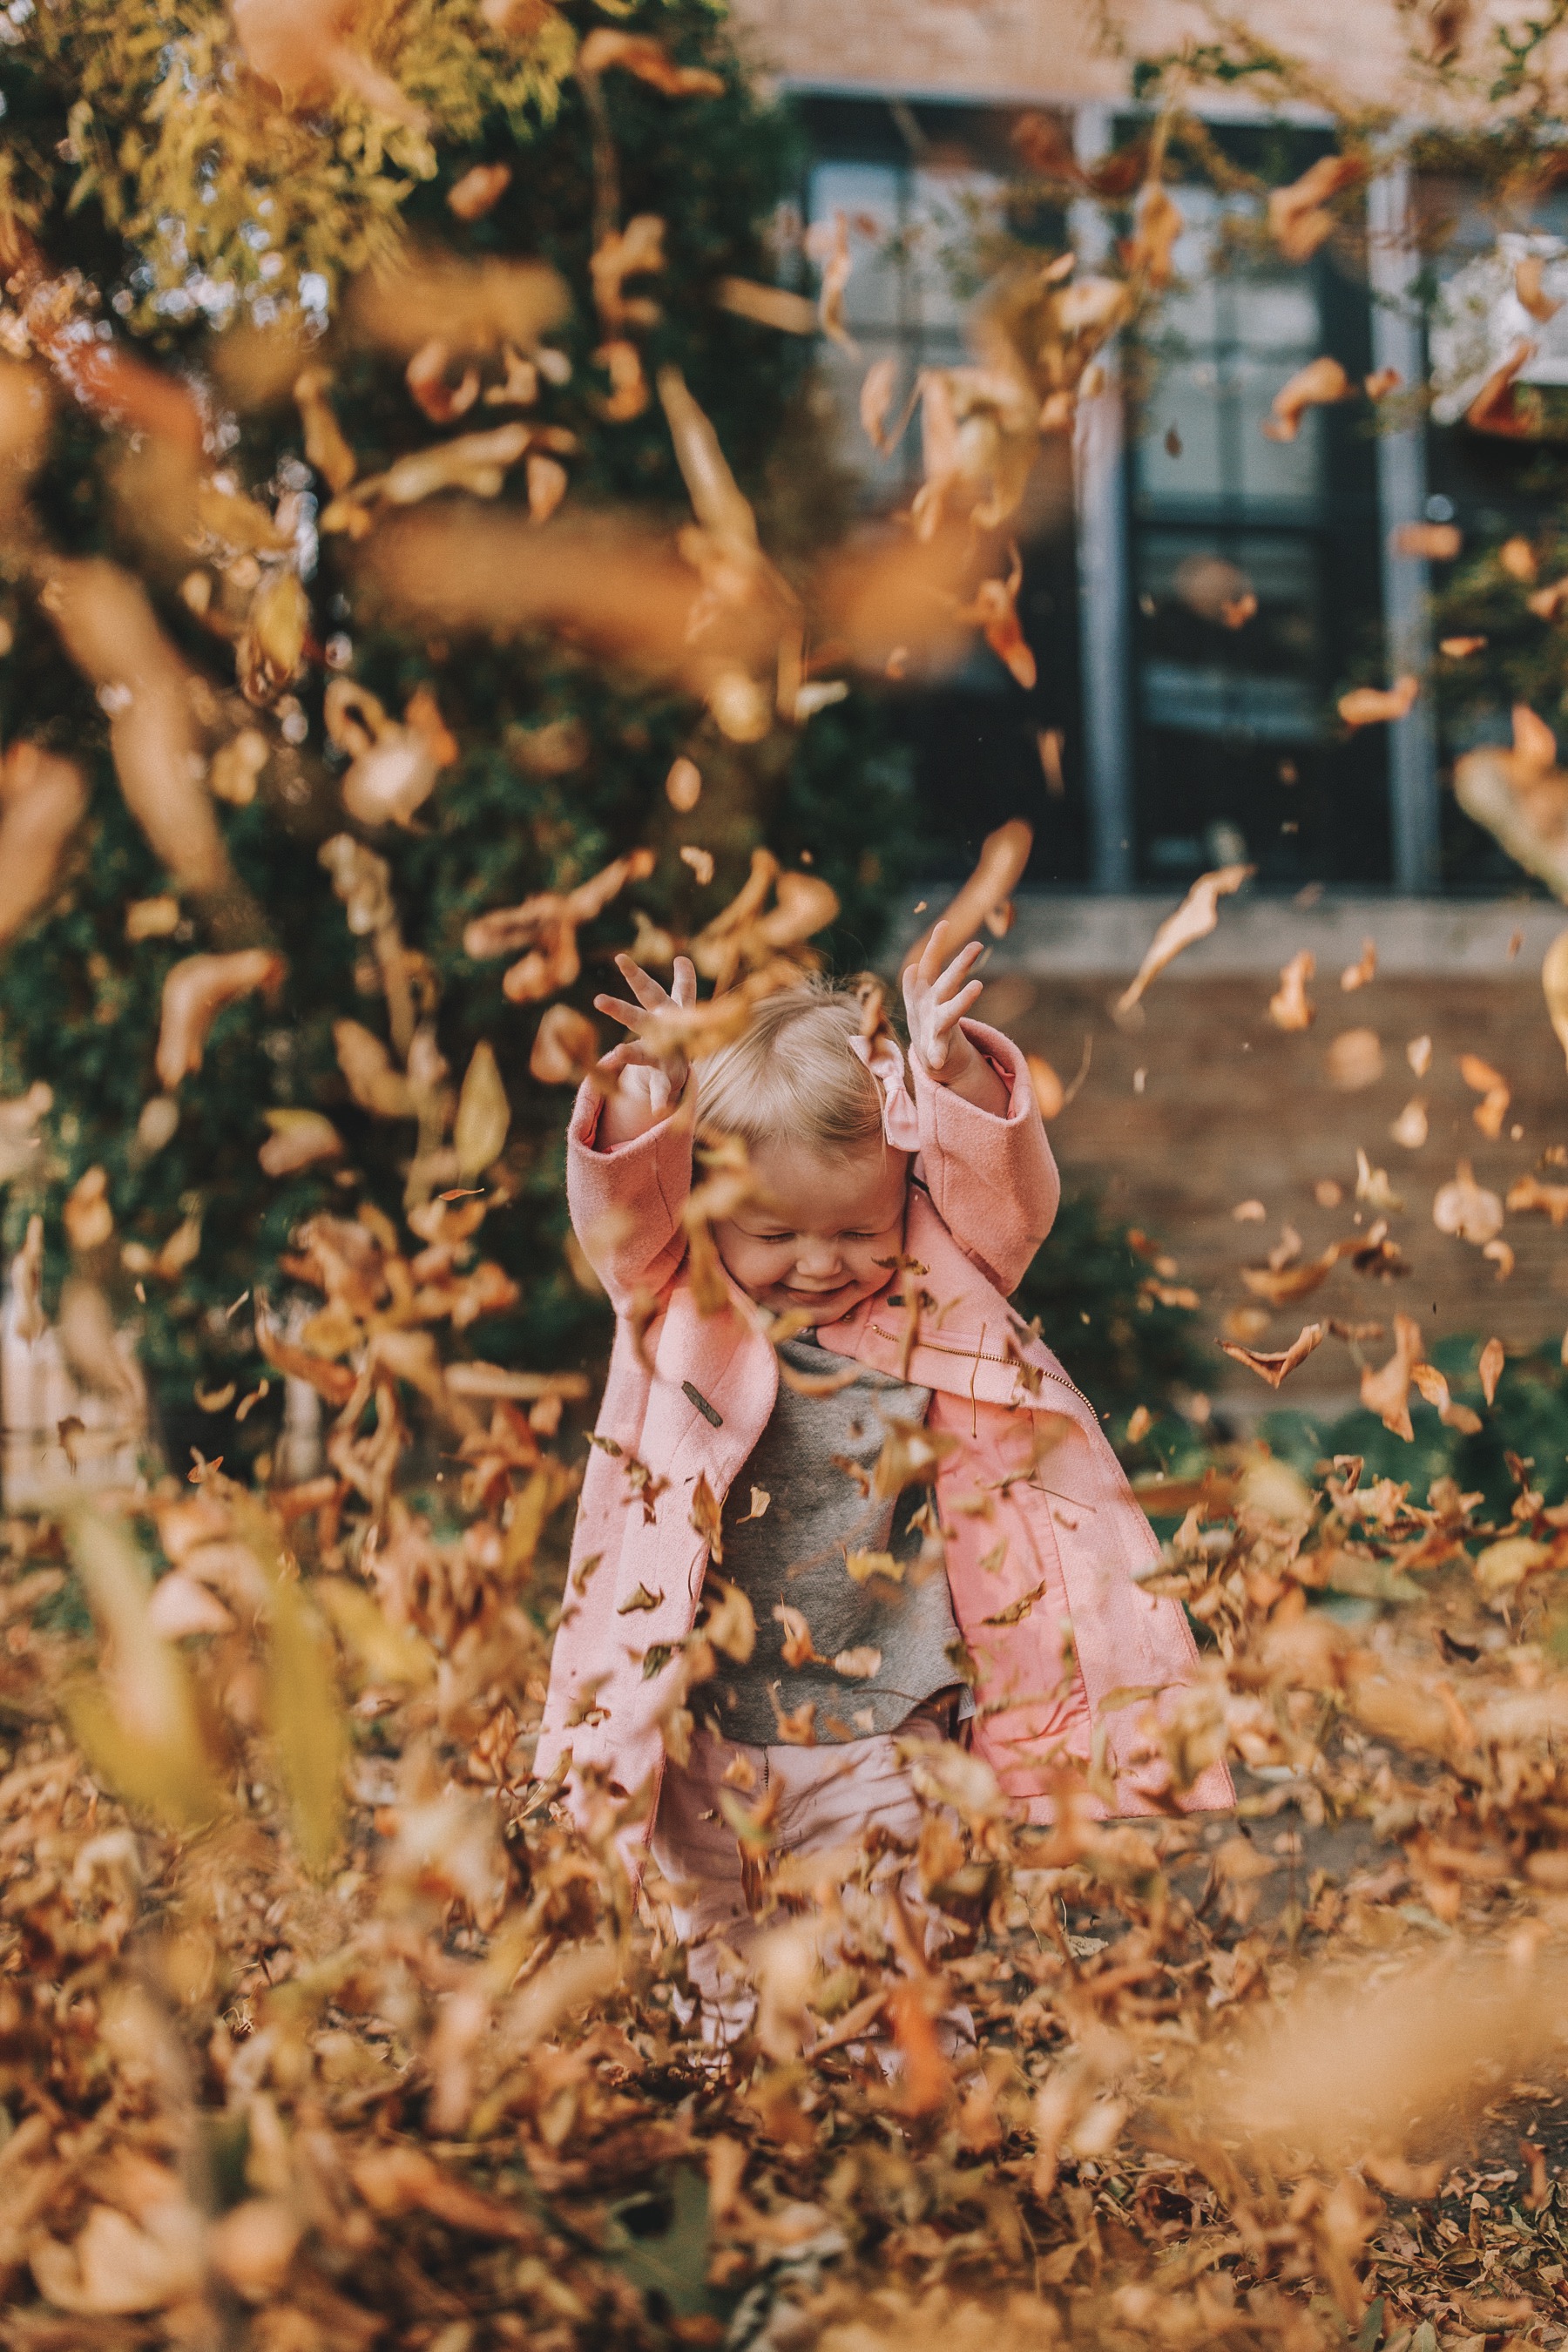 Fall activities for kids